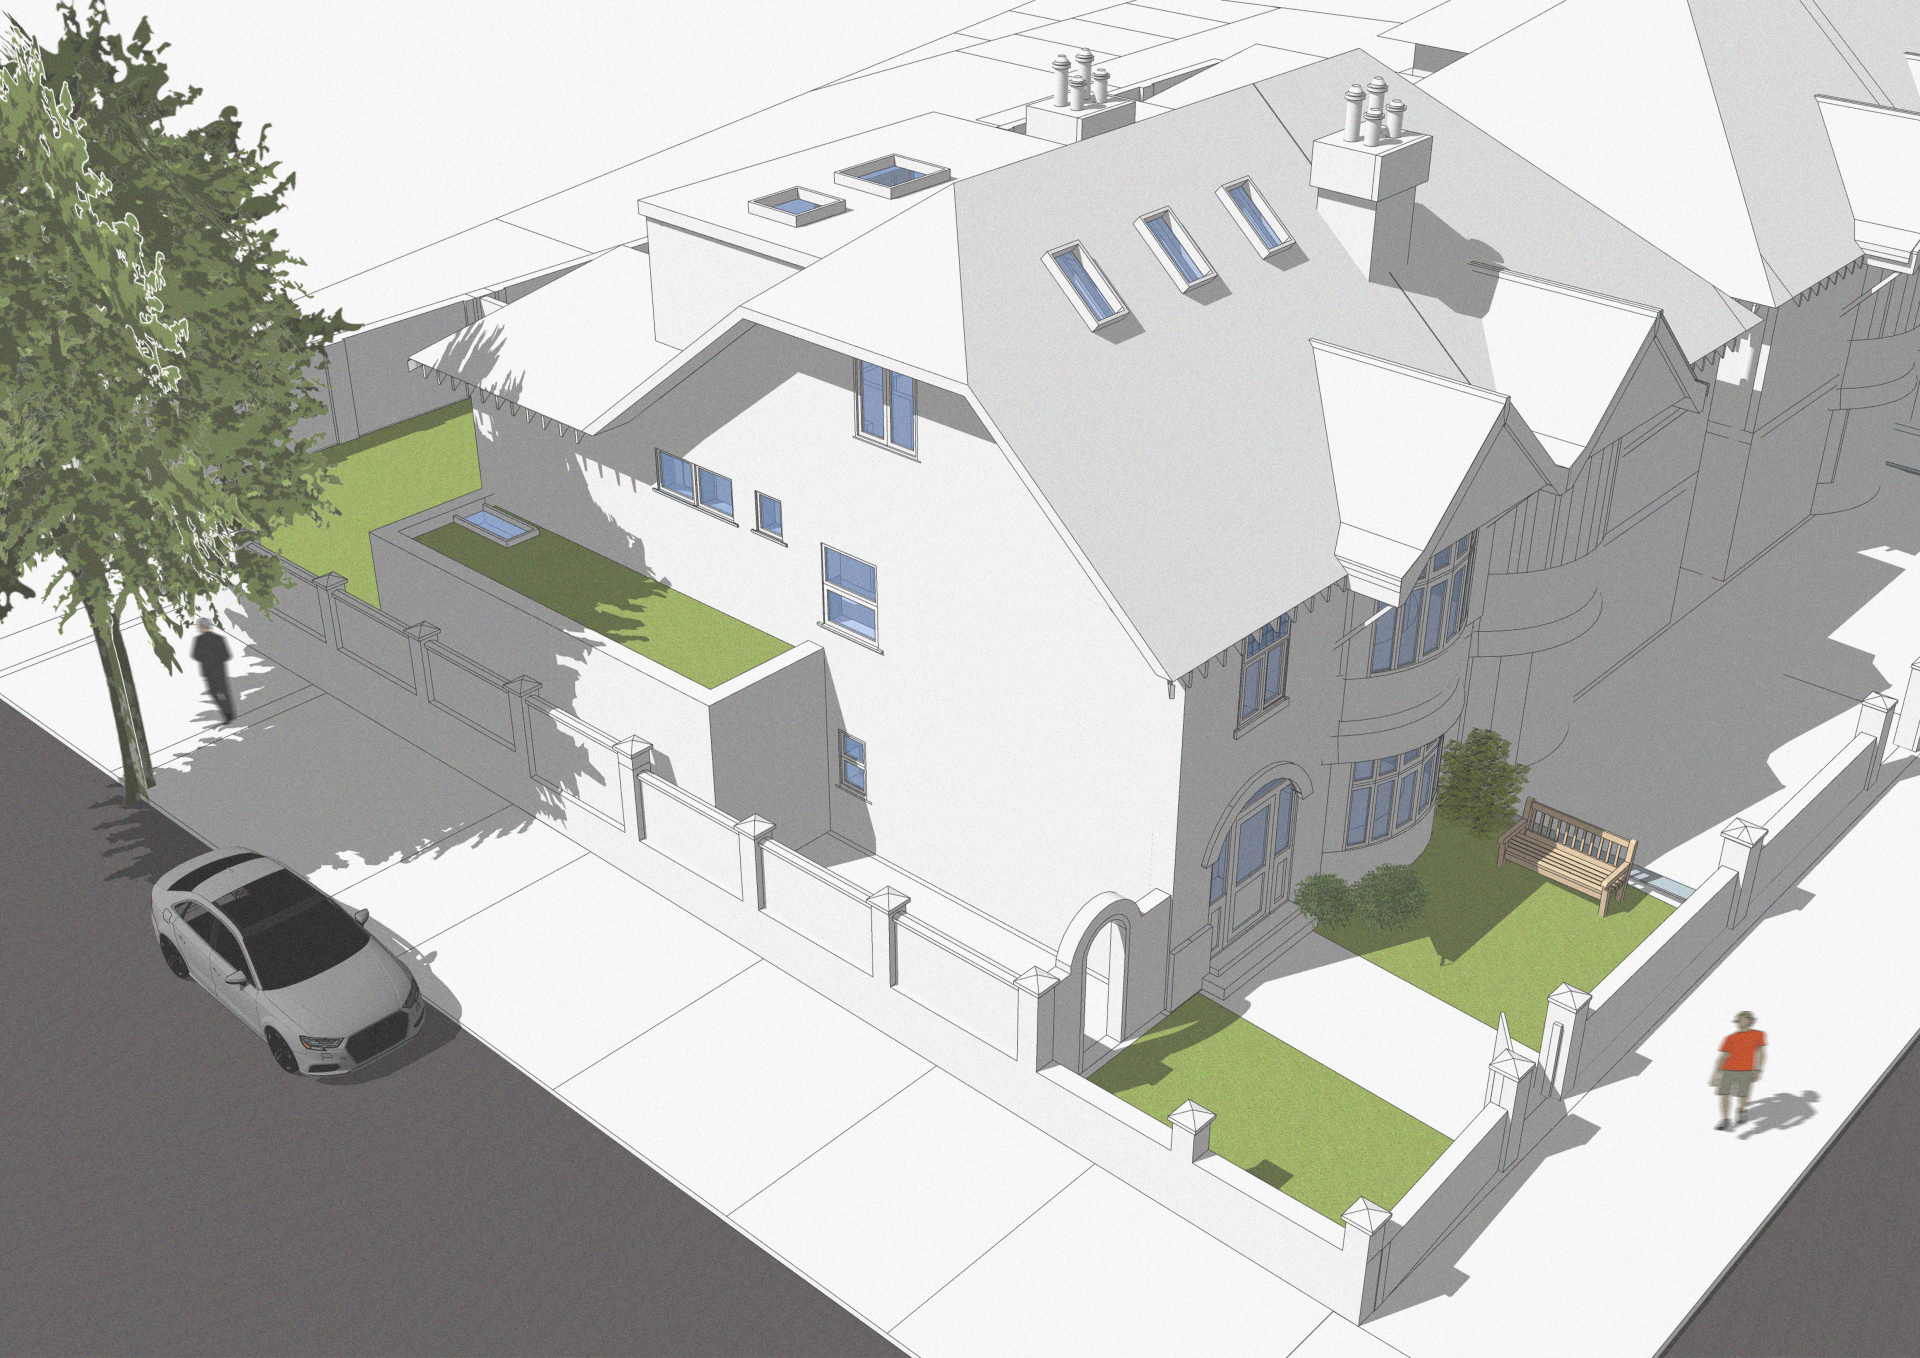 An image showing a 3D model of an infill project in Hove